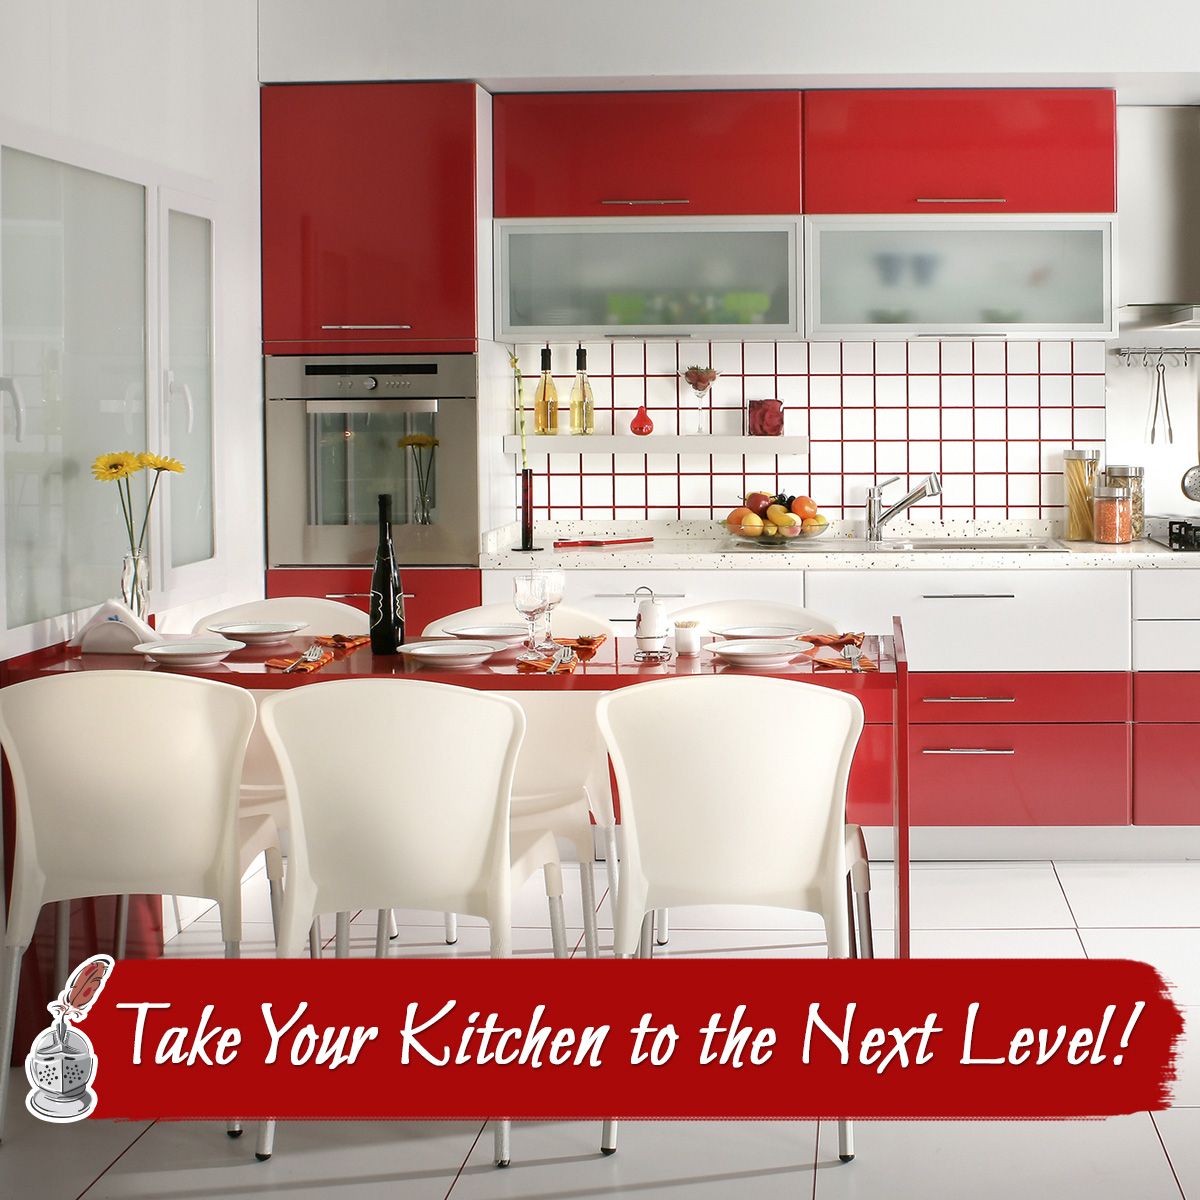 Take Your Kitchen to the Next Level!